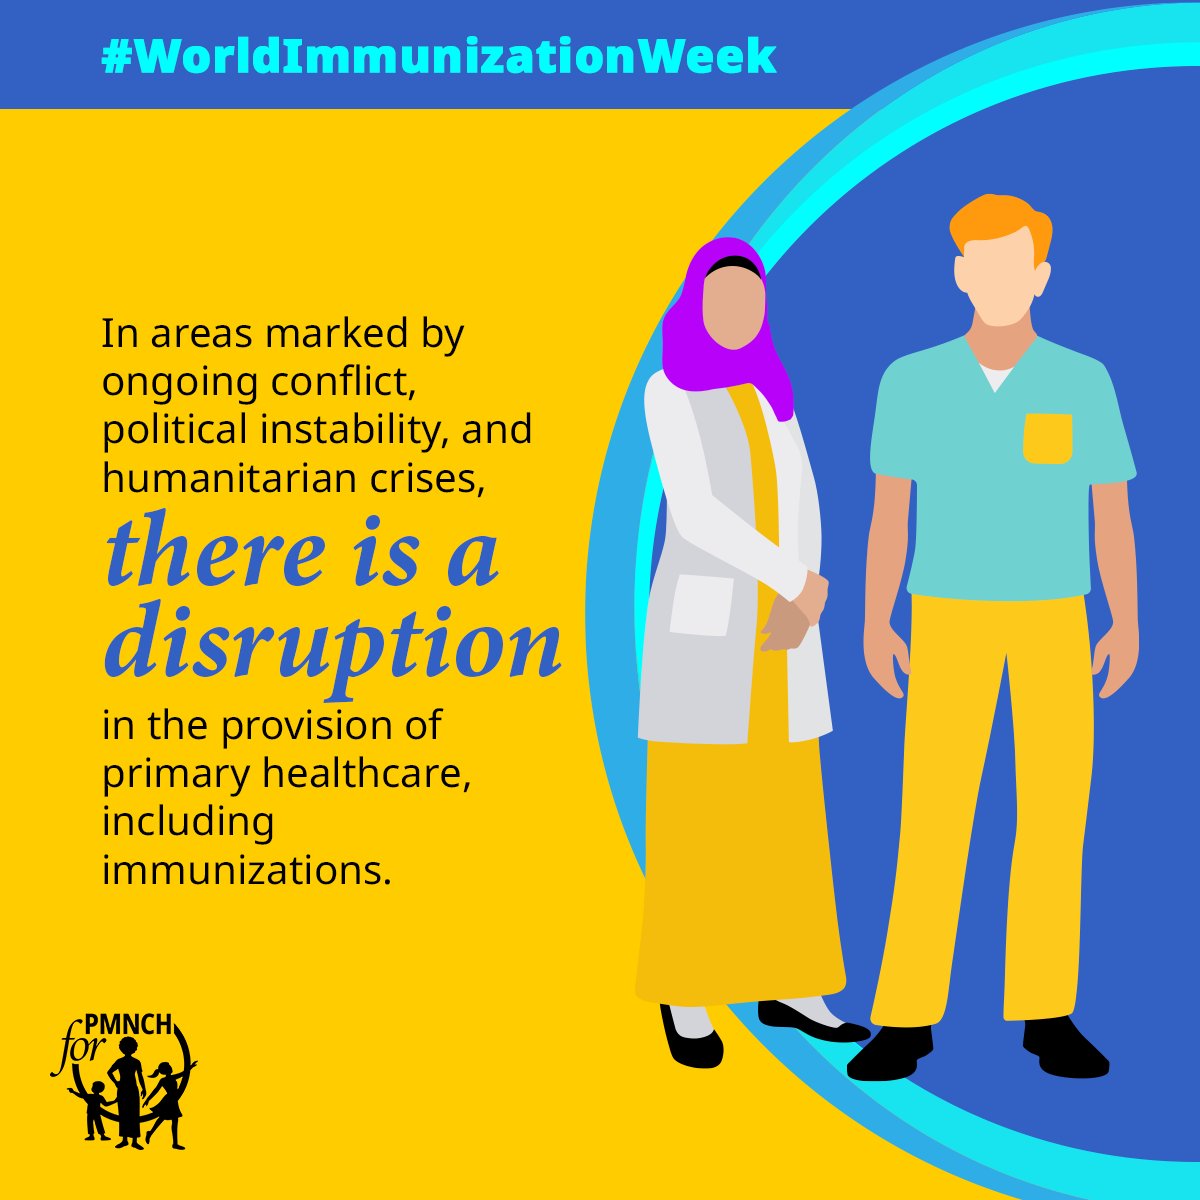 (🧵 1/2) This limits vulnerable populations' access to essential services and heightens the likelihood of disease outbreaks. #WorldInmunizationWeek @GAVI @WHO @UNICEF @gatesfoundation